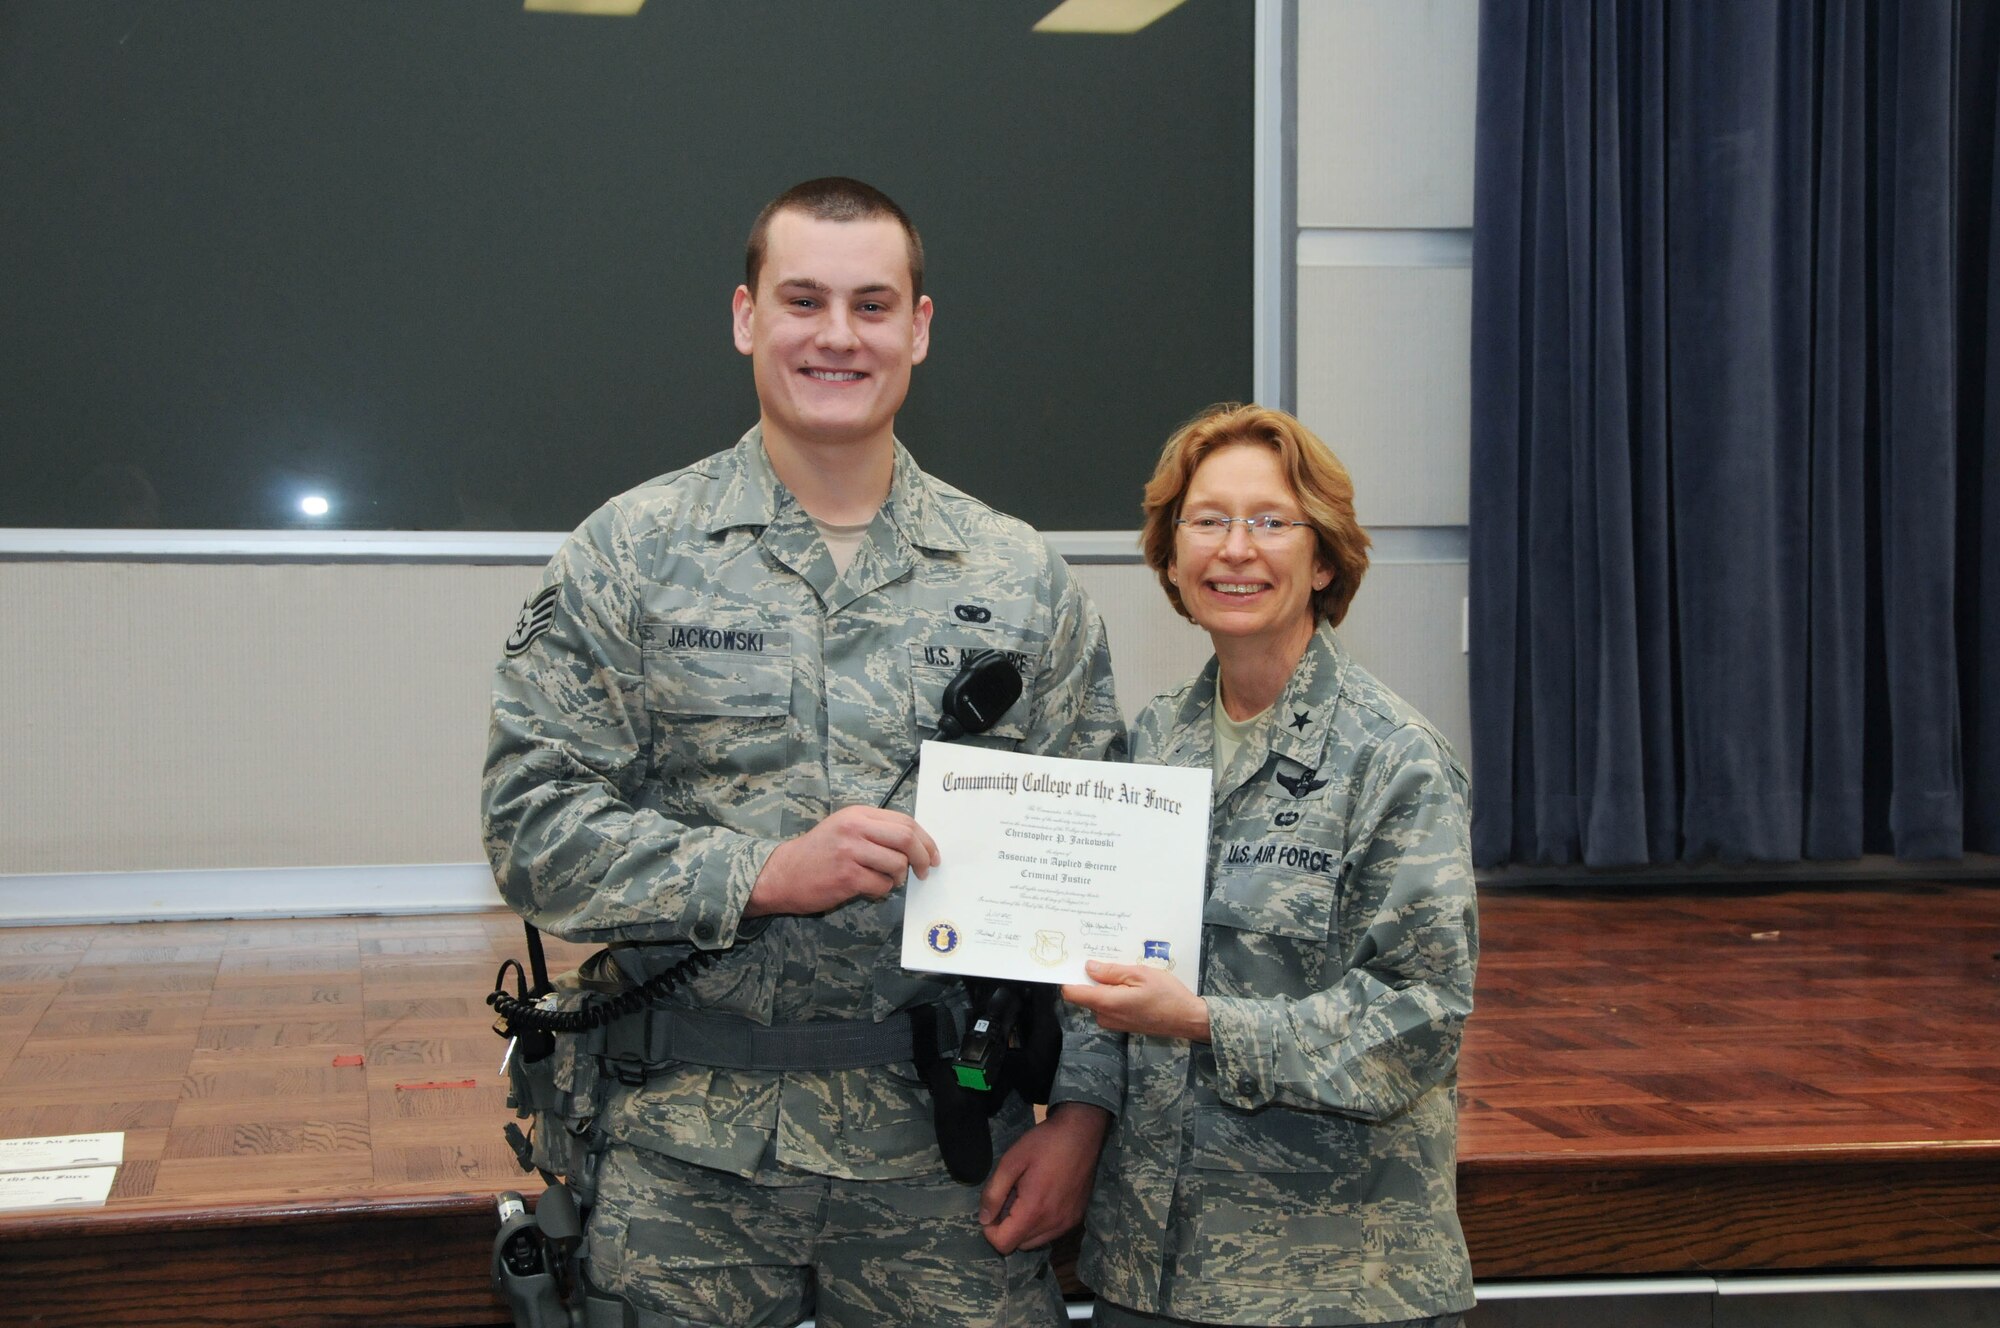 U.S. Air Force Staff Sgt. Christopher Jackowski, left, a member of the 166th Security Forces Squadron, 166th Airlift Wing, receives a certificate from Brig. Gen. Carol Timmons, assistant adjutant general for air, Delaware National Guard to recognize Jackowski’s attainment of a Community College of the Air Force associate of applied science degree in criminal justice at a CCAF Class of October 2013 graduation ceremony held Nov. 3, 2013 at the New Castle Air National Guard Base, Del. (U.S. Air National Guard photo by Tech. Sgt. Robin Meredith)